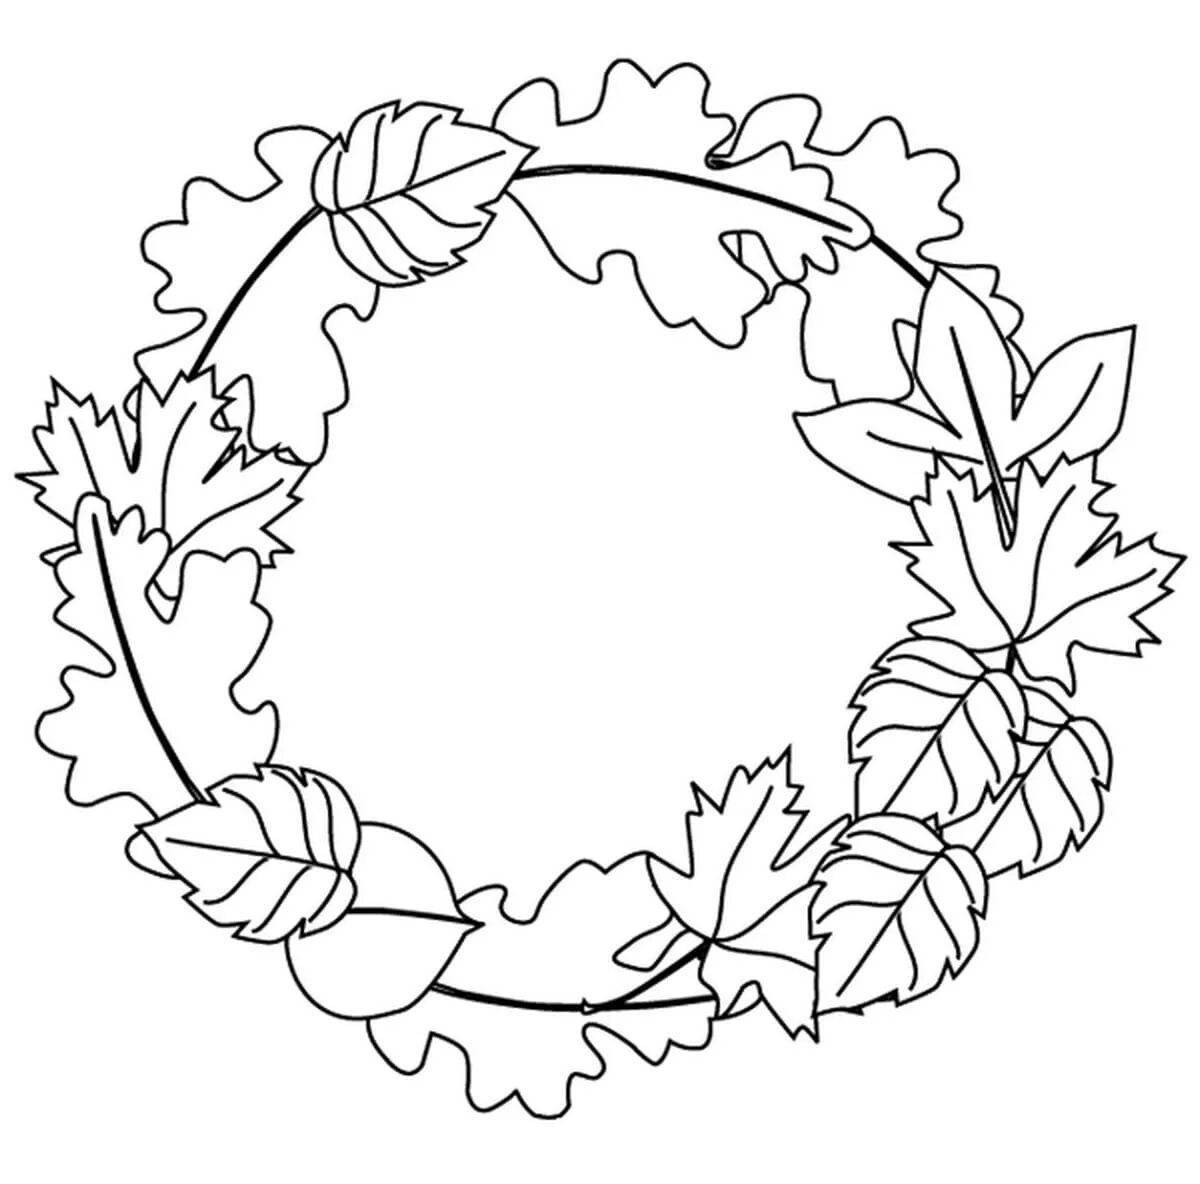 Shining wreath coloring page